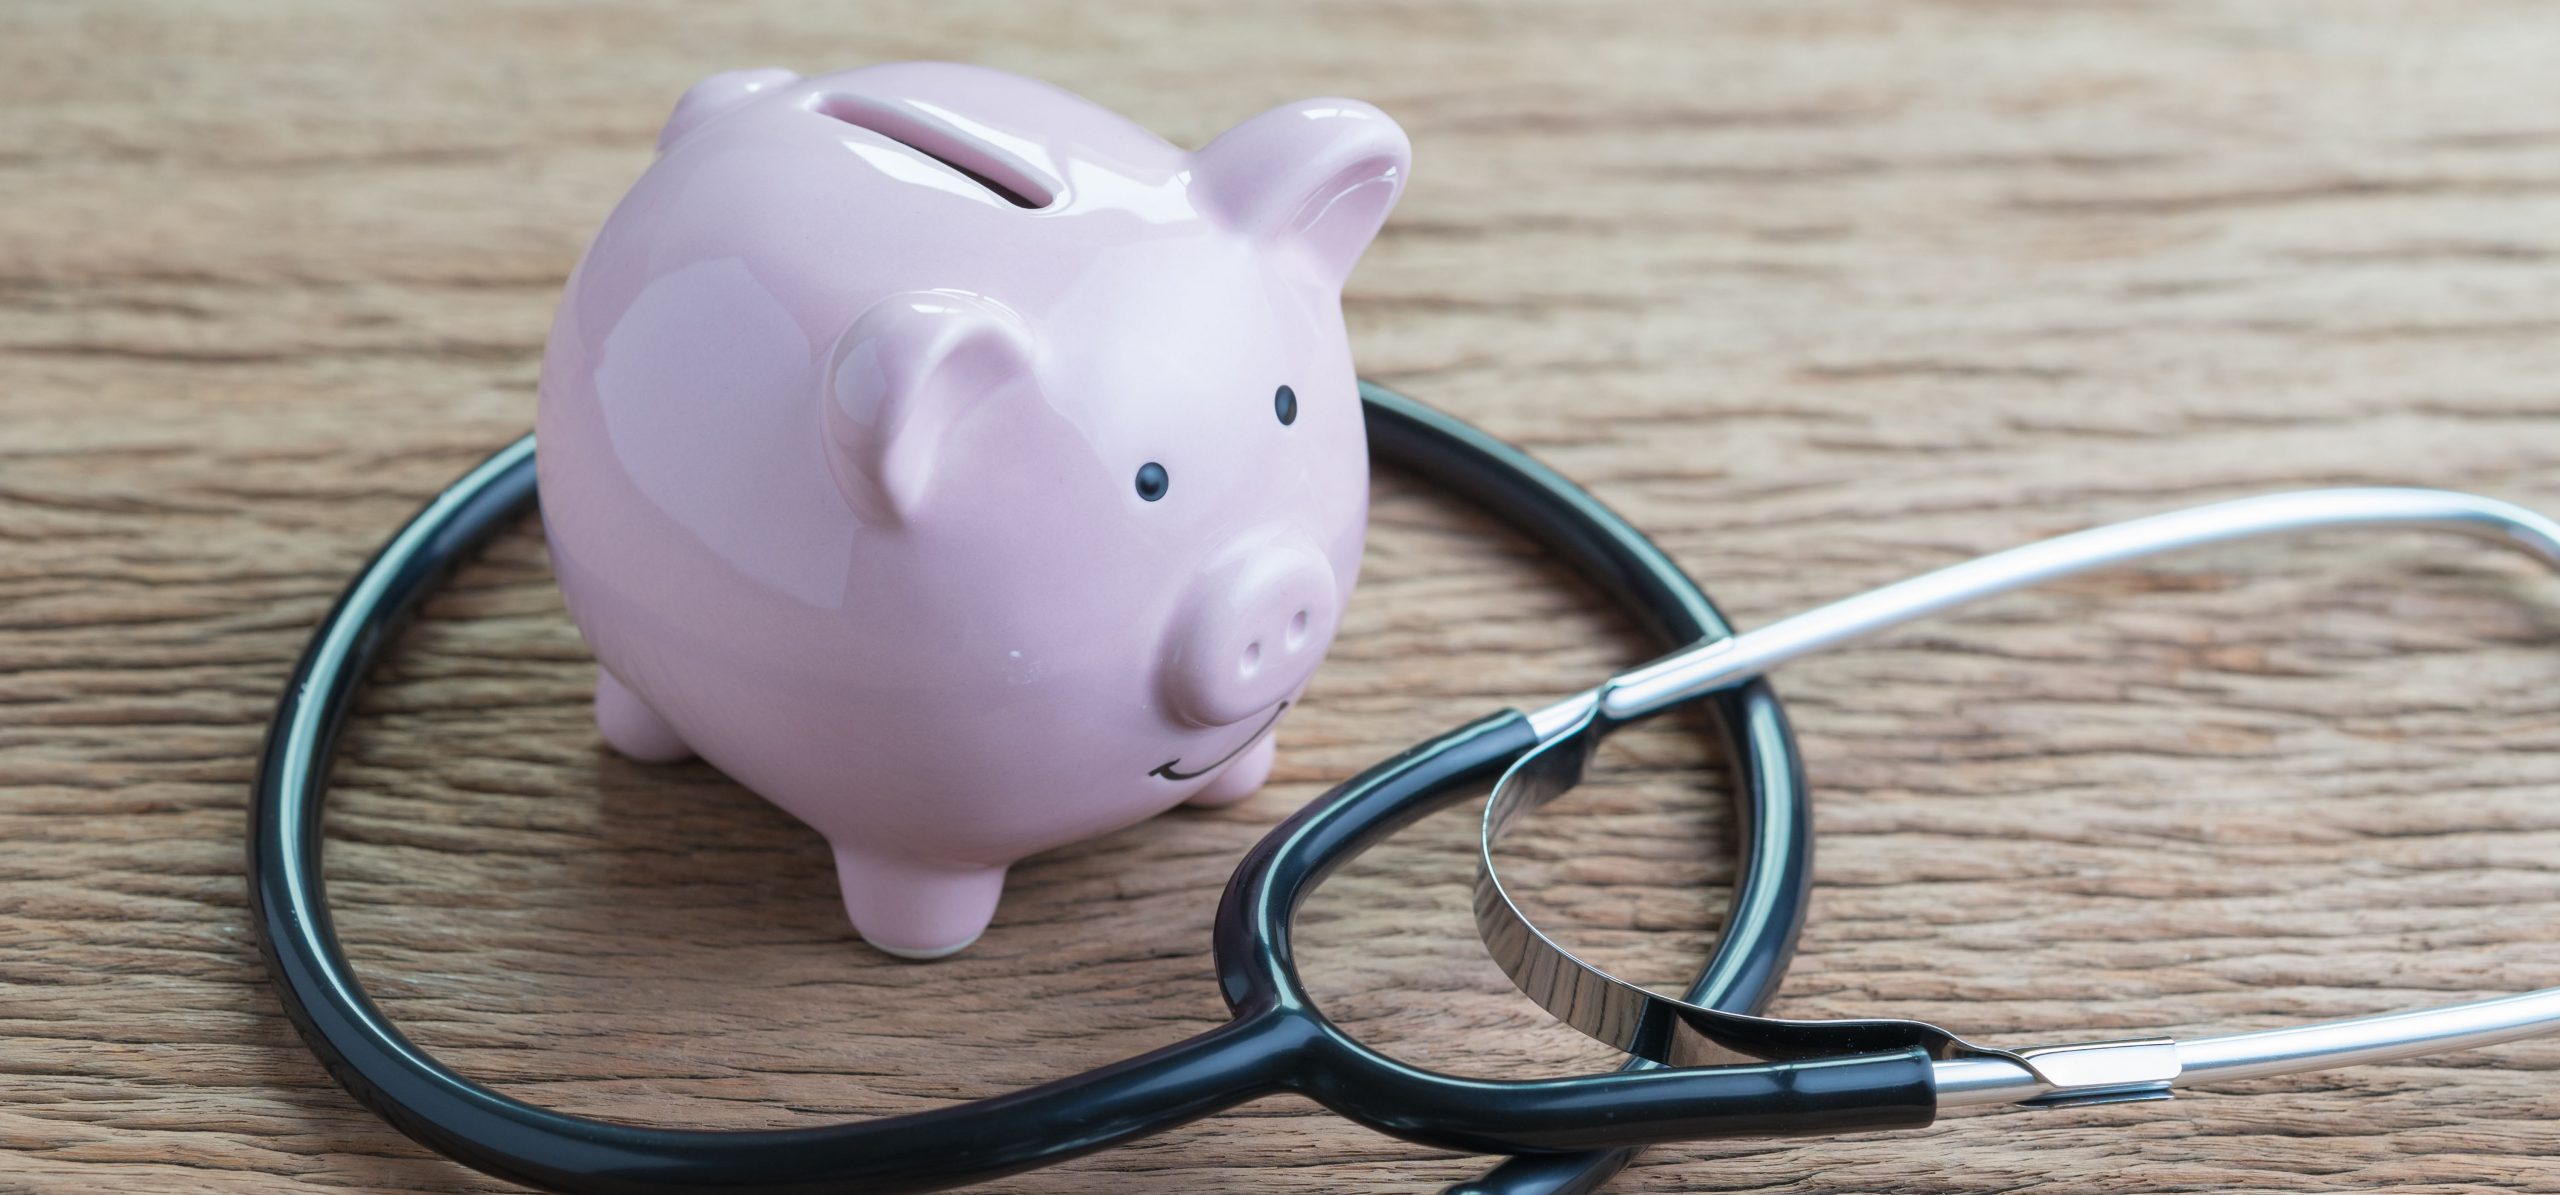 Healthcare, medical, insurance fees or financial health check concept, stethoscope with pink piggy bank on wooden table.